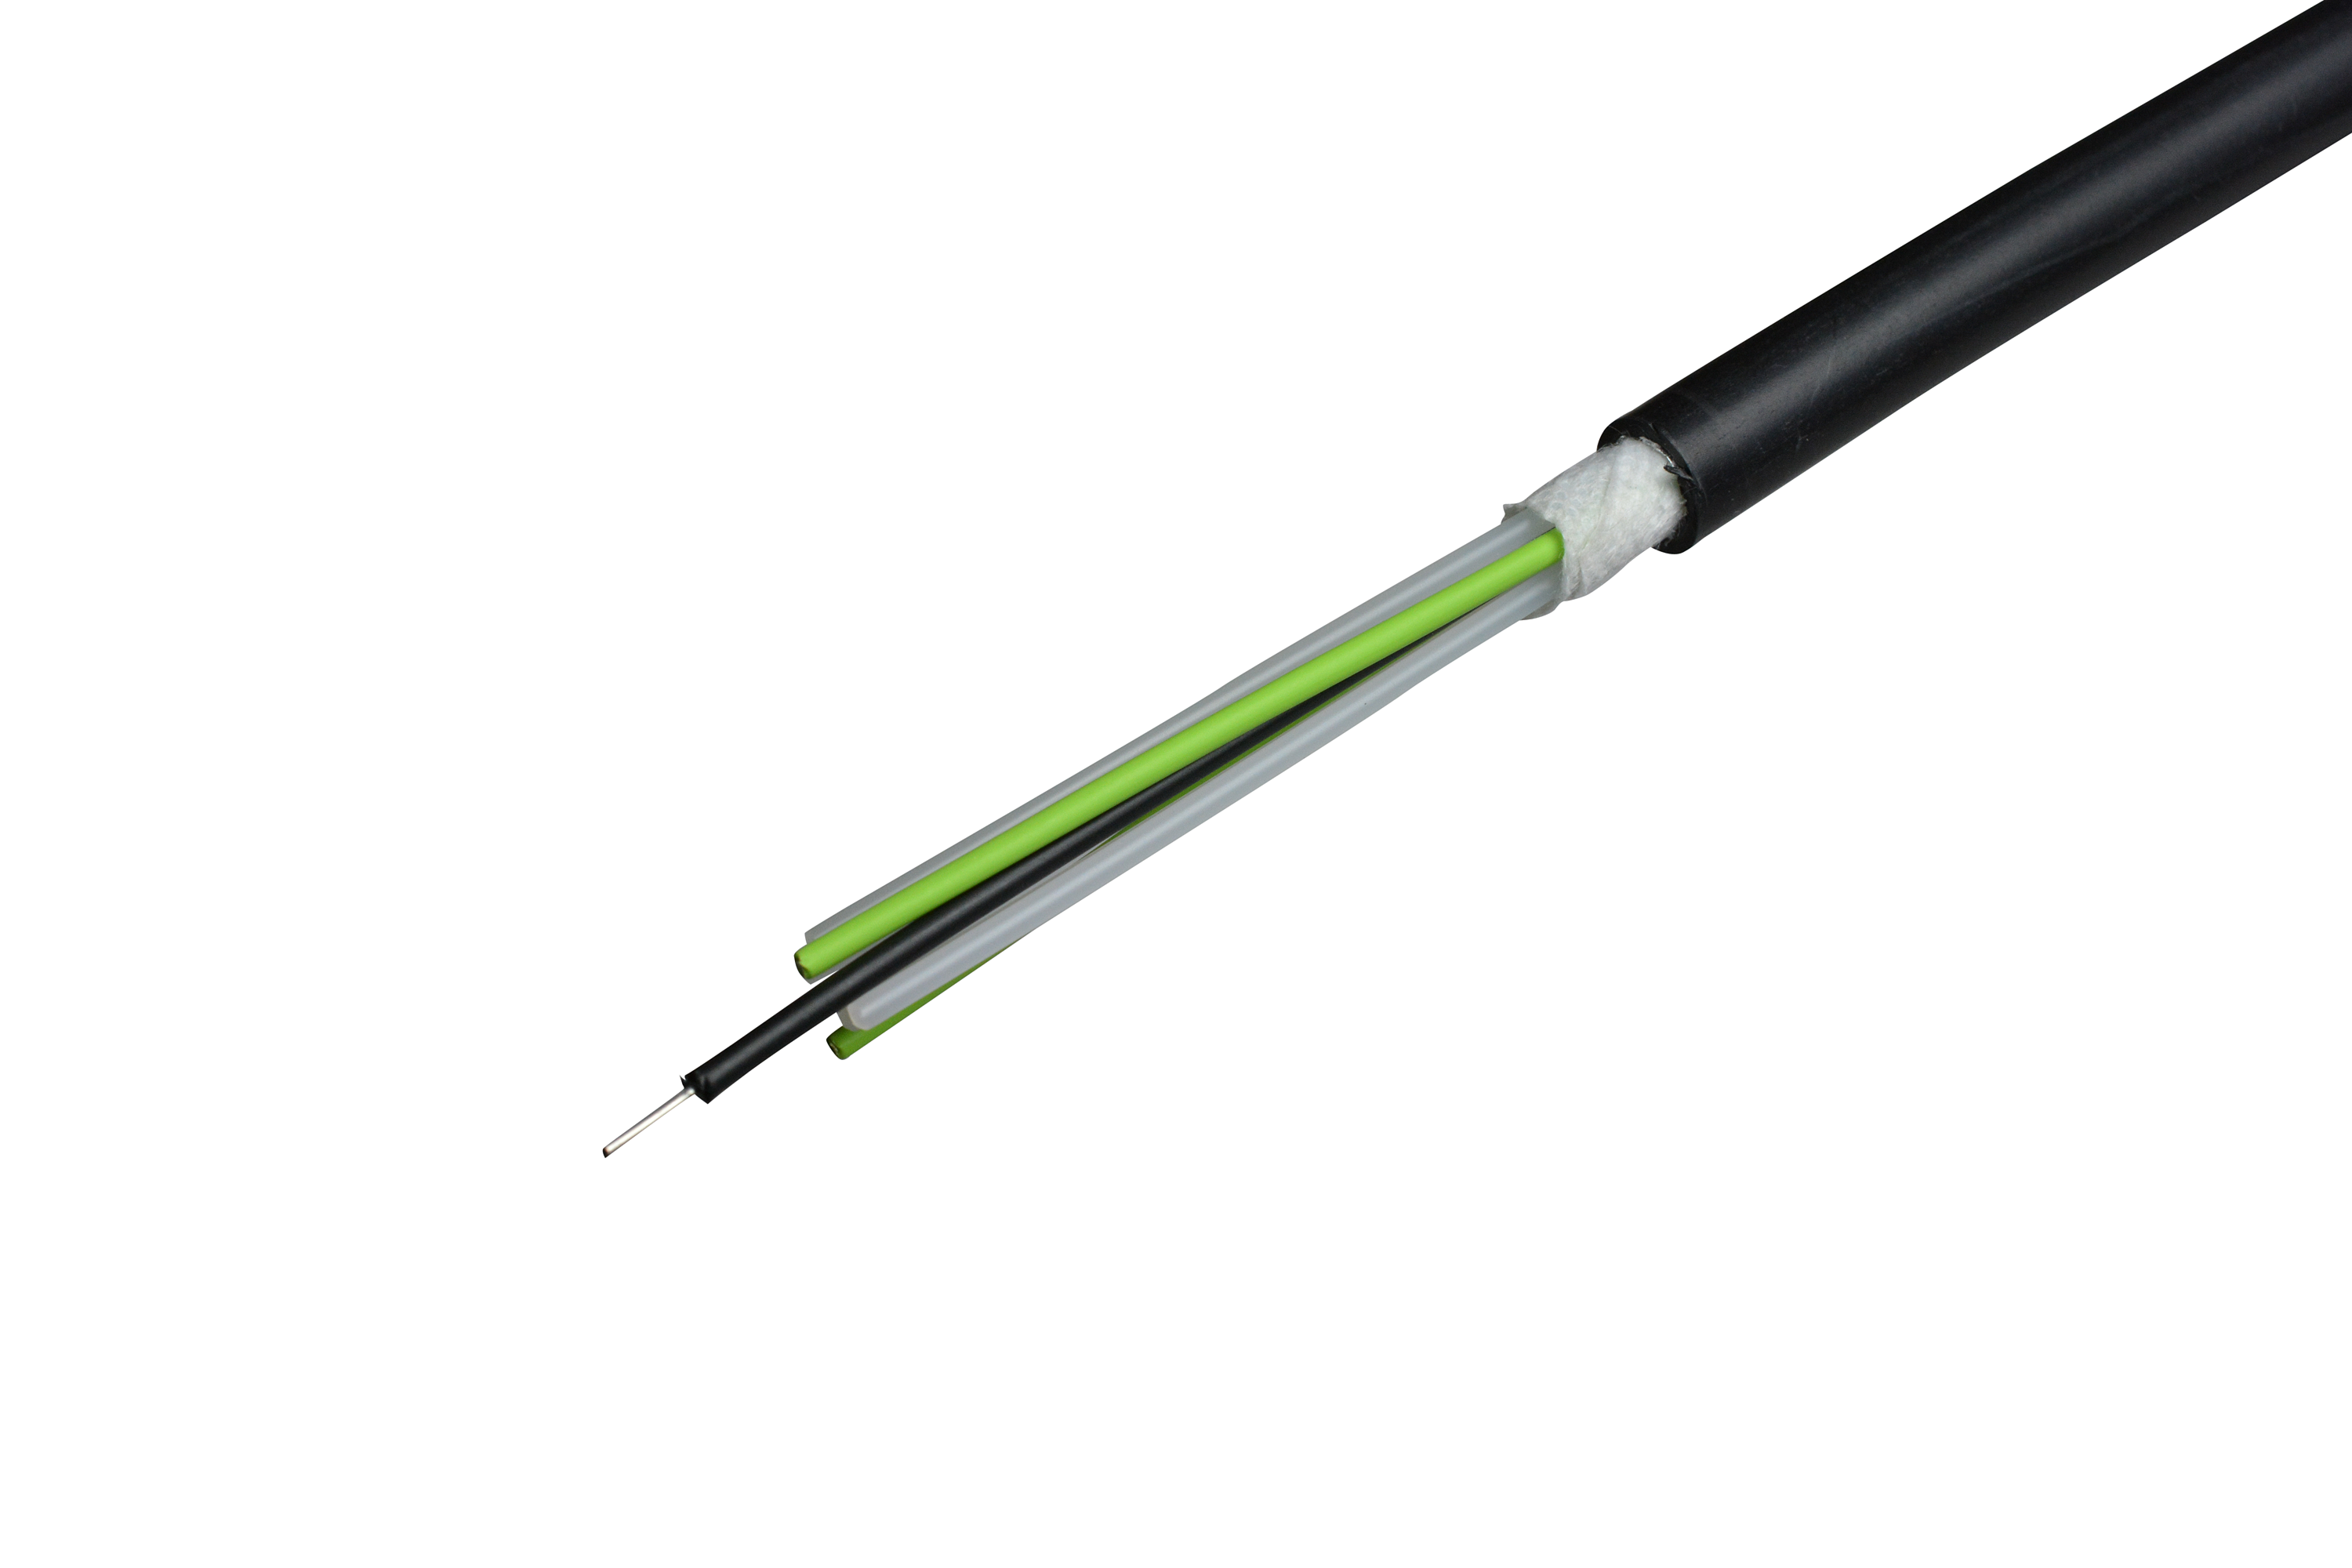 4cores,OM4,Unitized Round Type Fiber Optic Cable for Indoor and OutdoorUse.